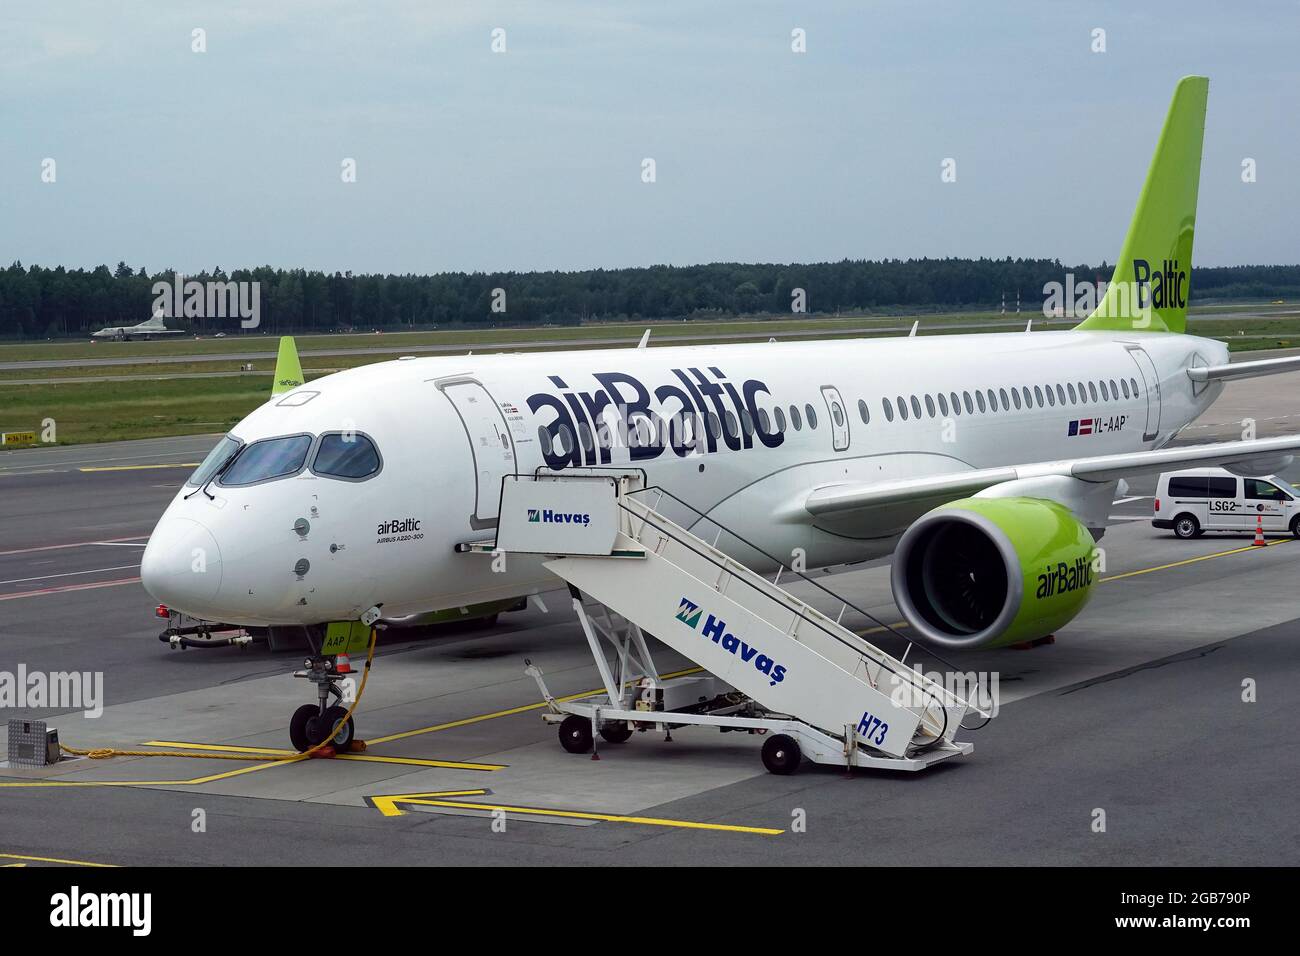 airBaltic (National airline of Latvia), Airbus A220-300 airplane Stock Photo